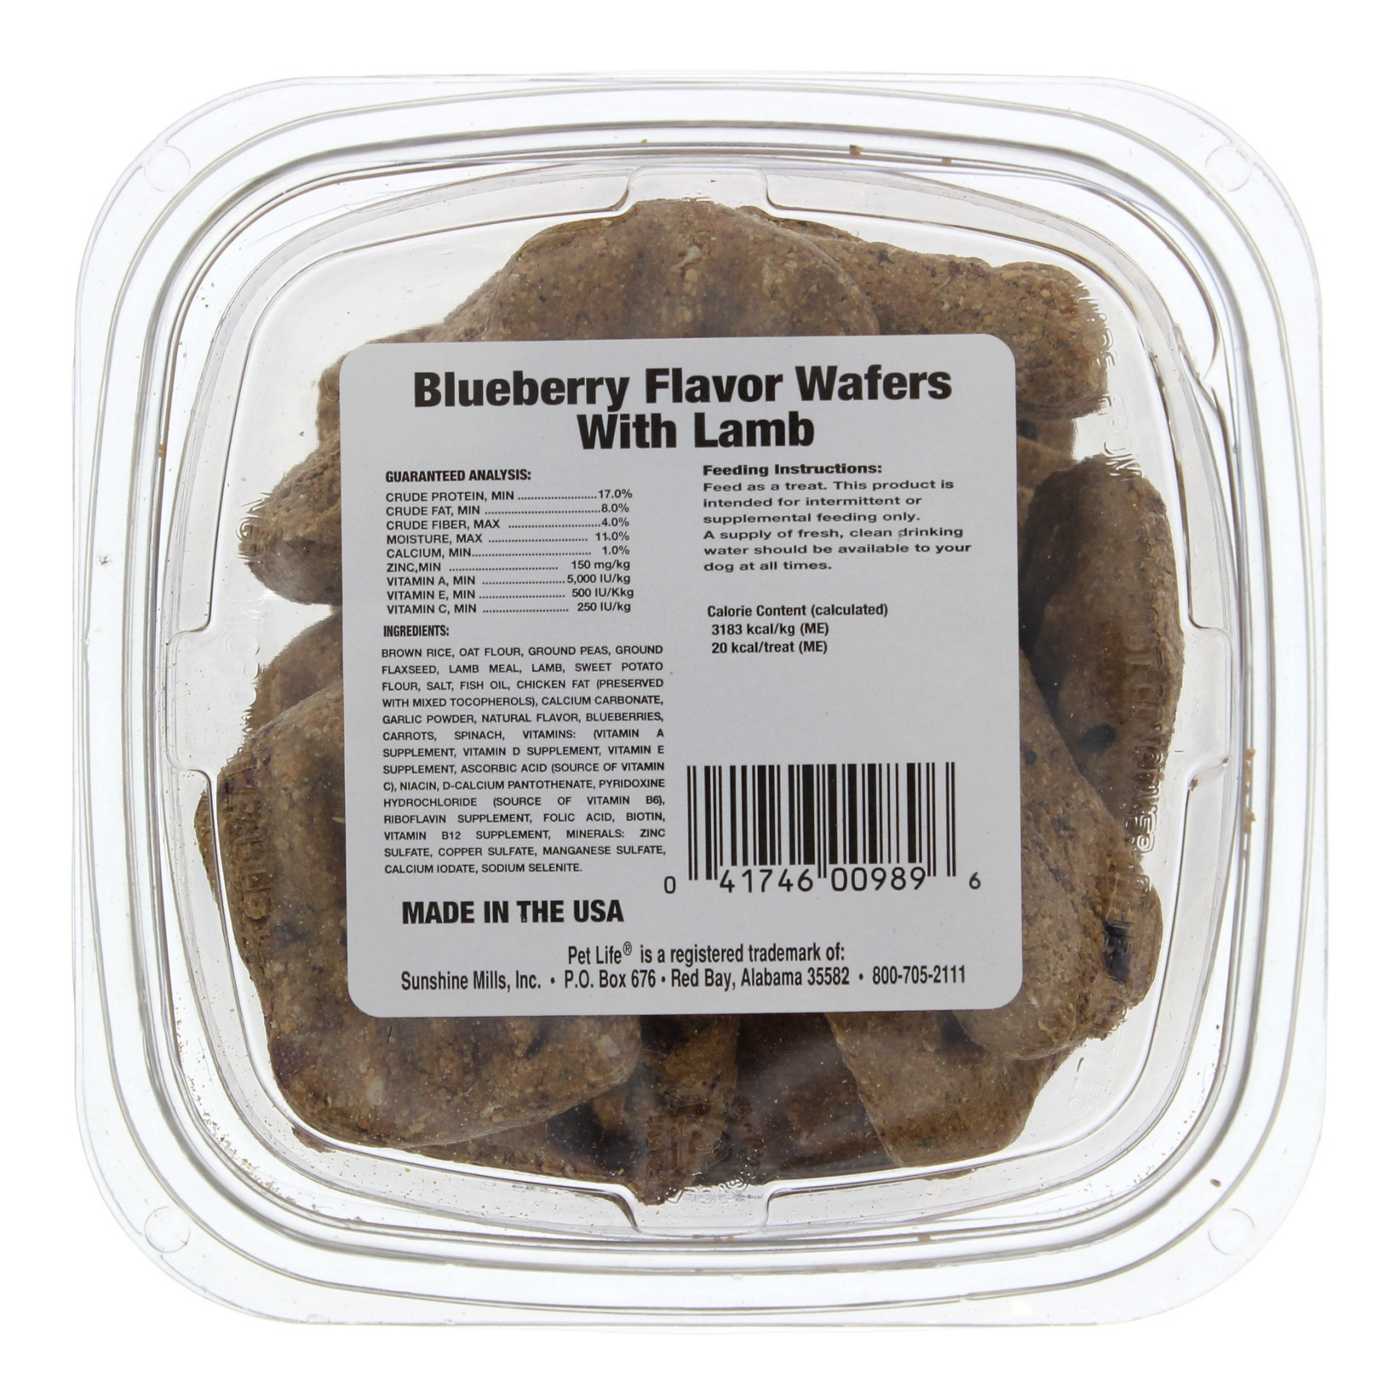 Pet Life Blueberry Wafers with Lamb for Dogs; image 2 of 2